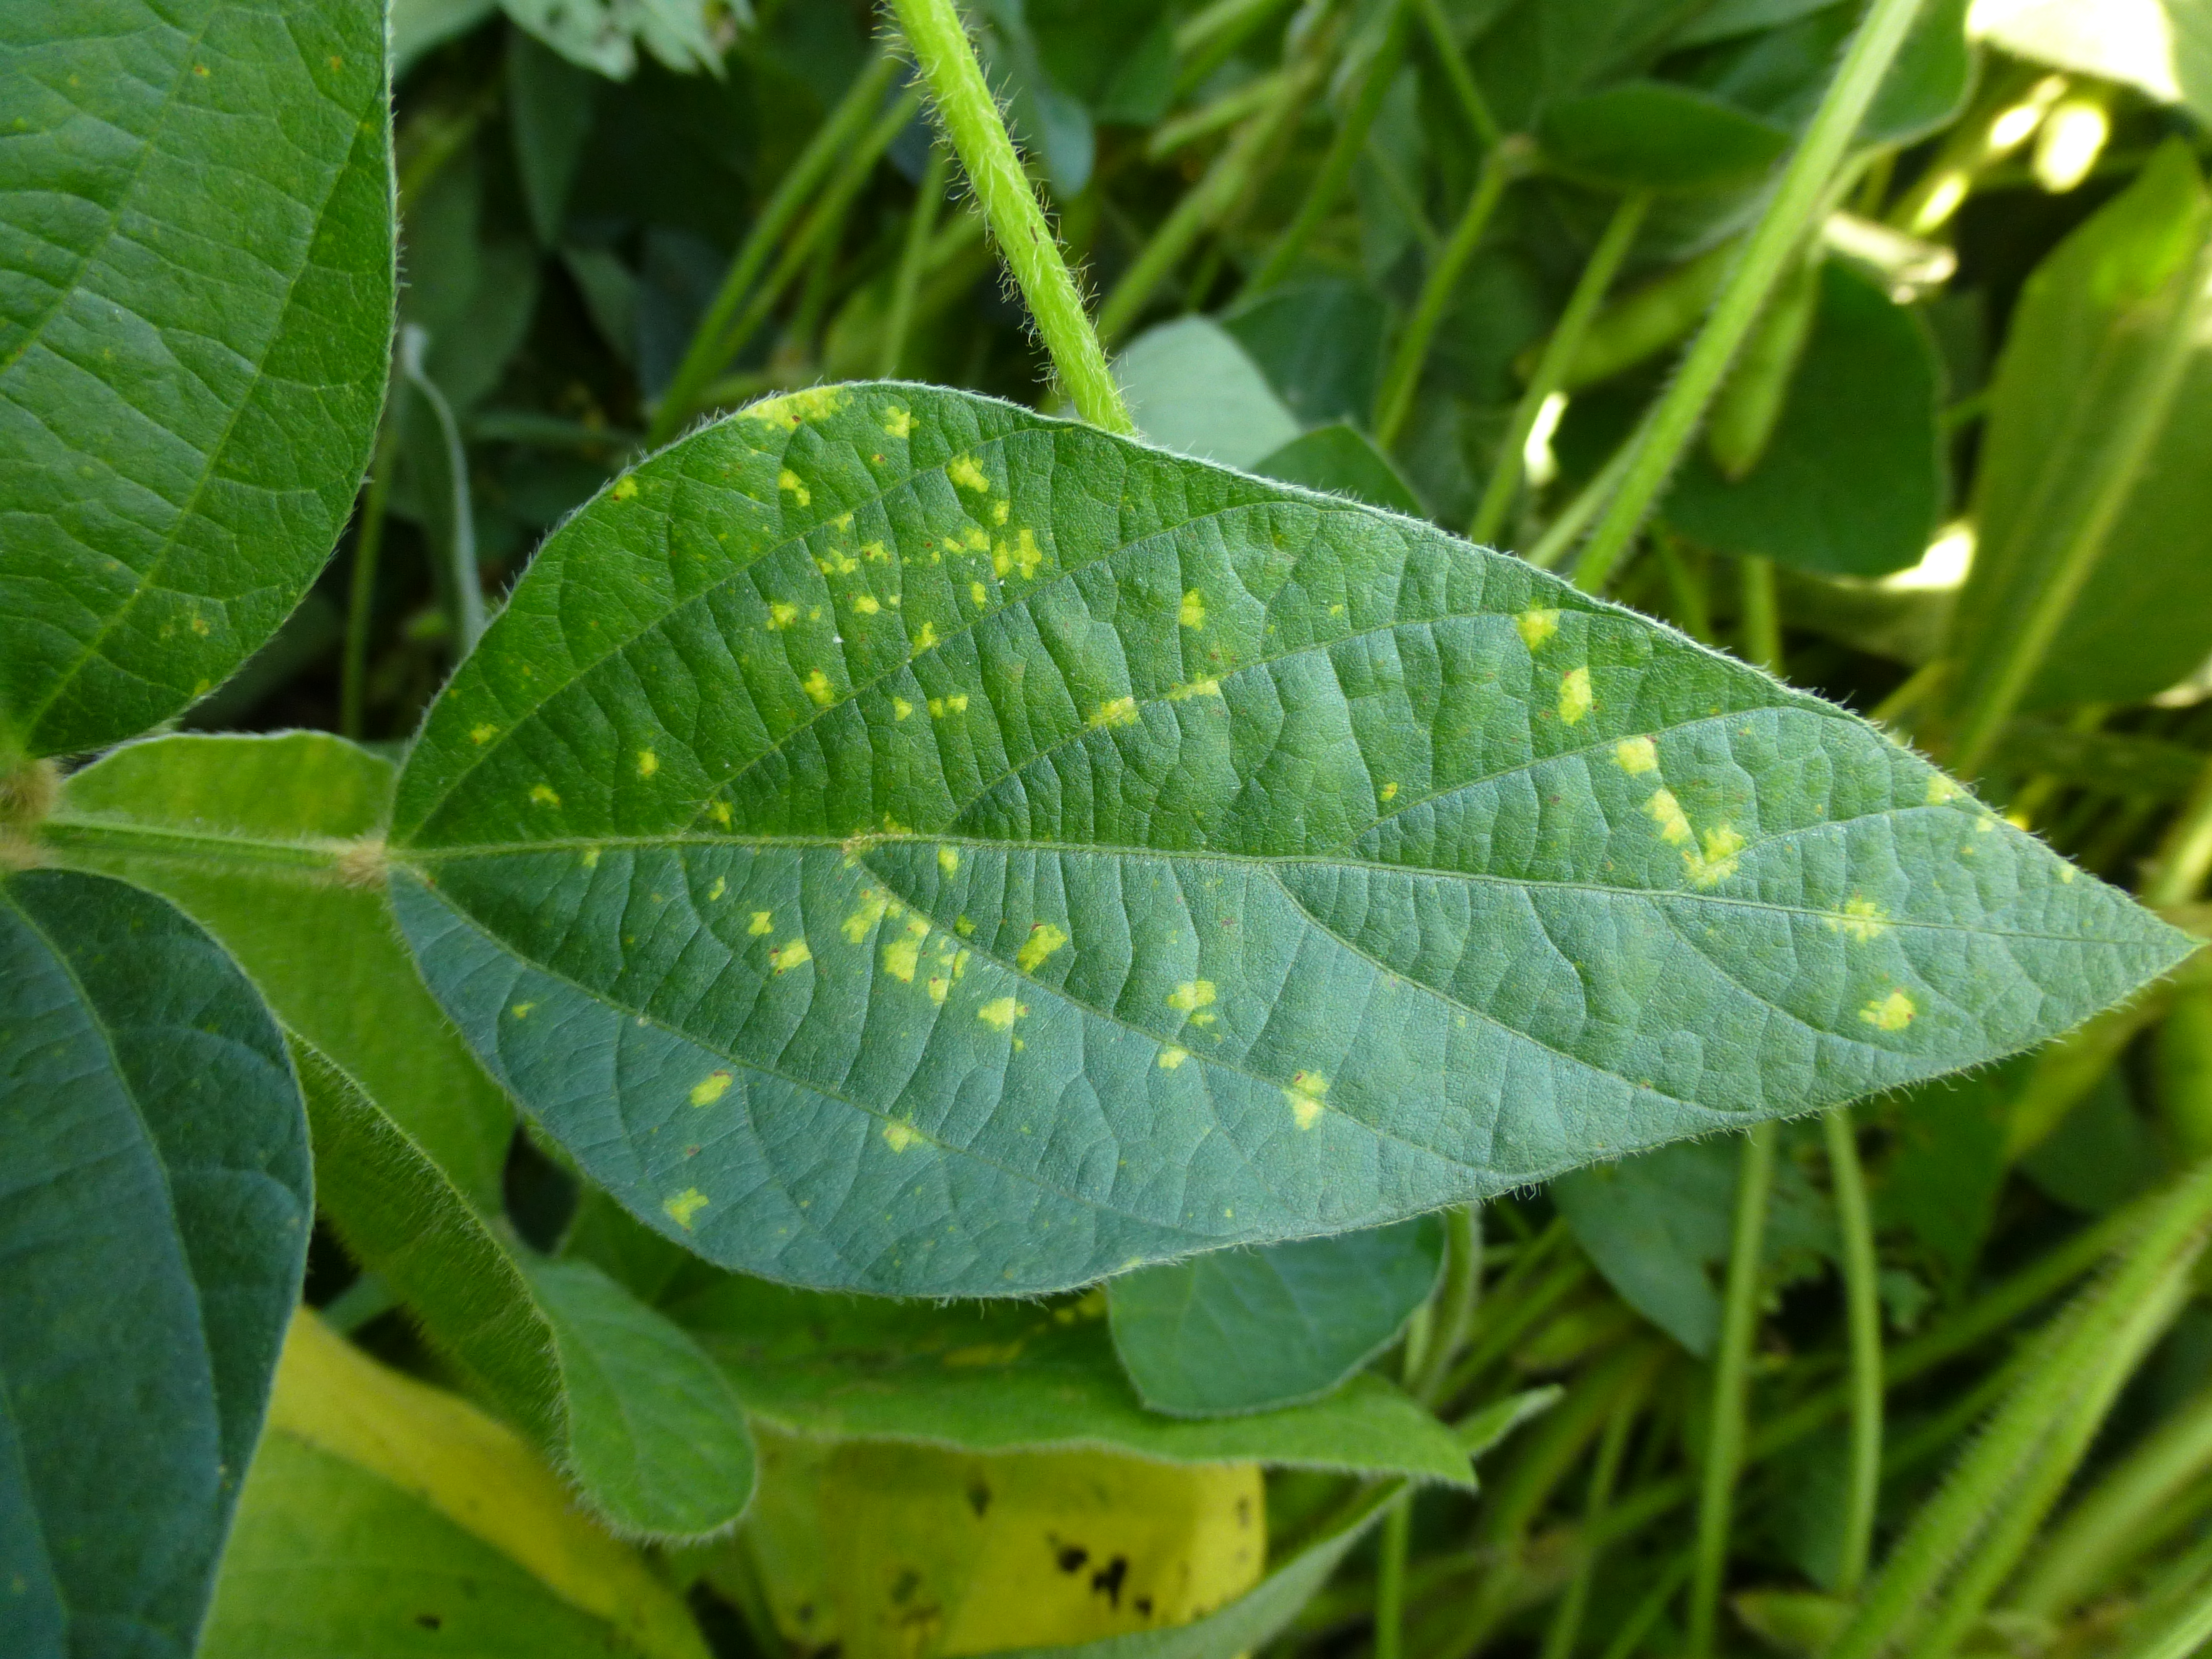 Downy mildew lesions enlarge into pale to bright yellow spots over time.